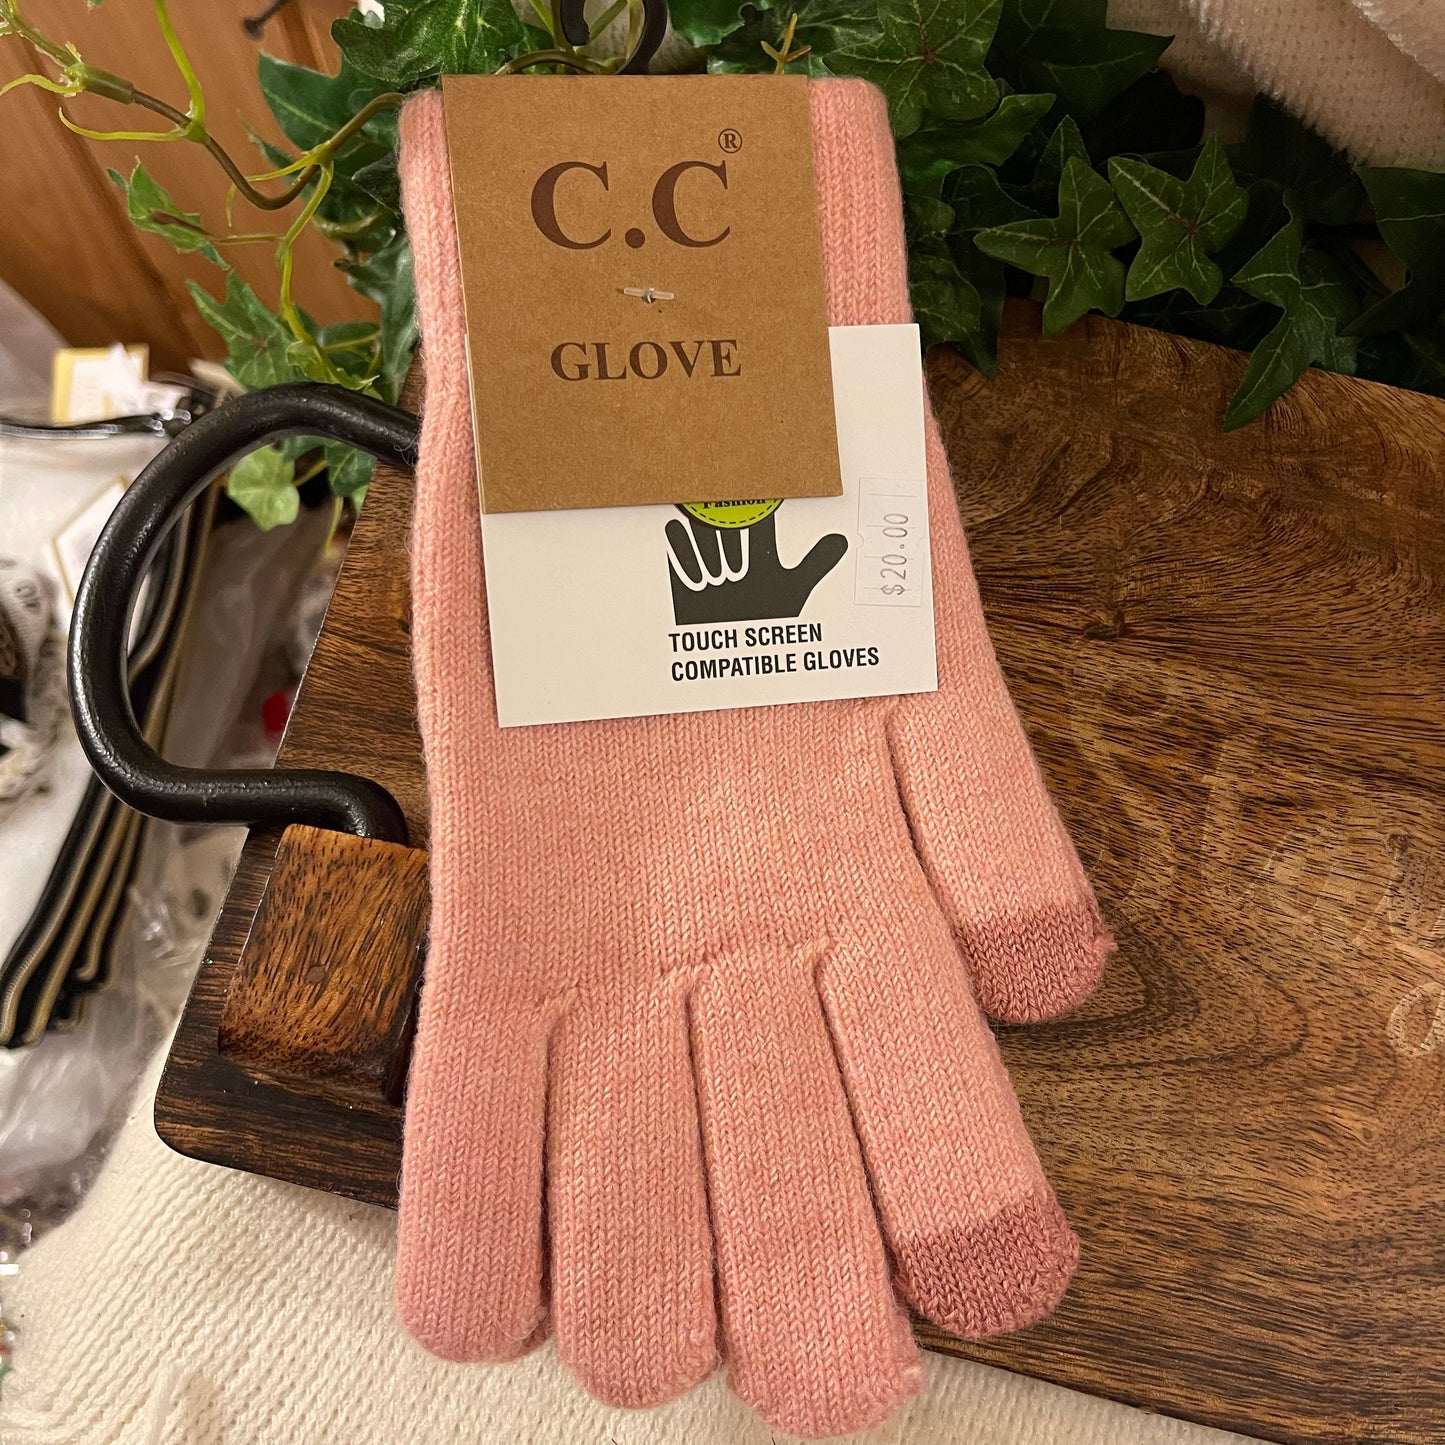 C.C® Recycled Yarn Smart Touch Gloves